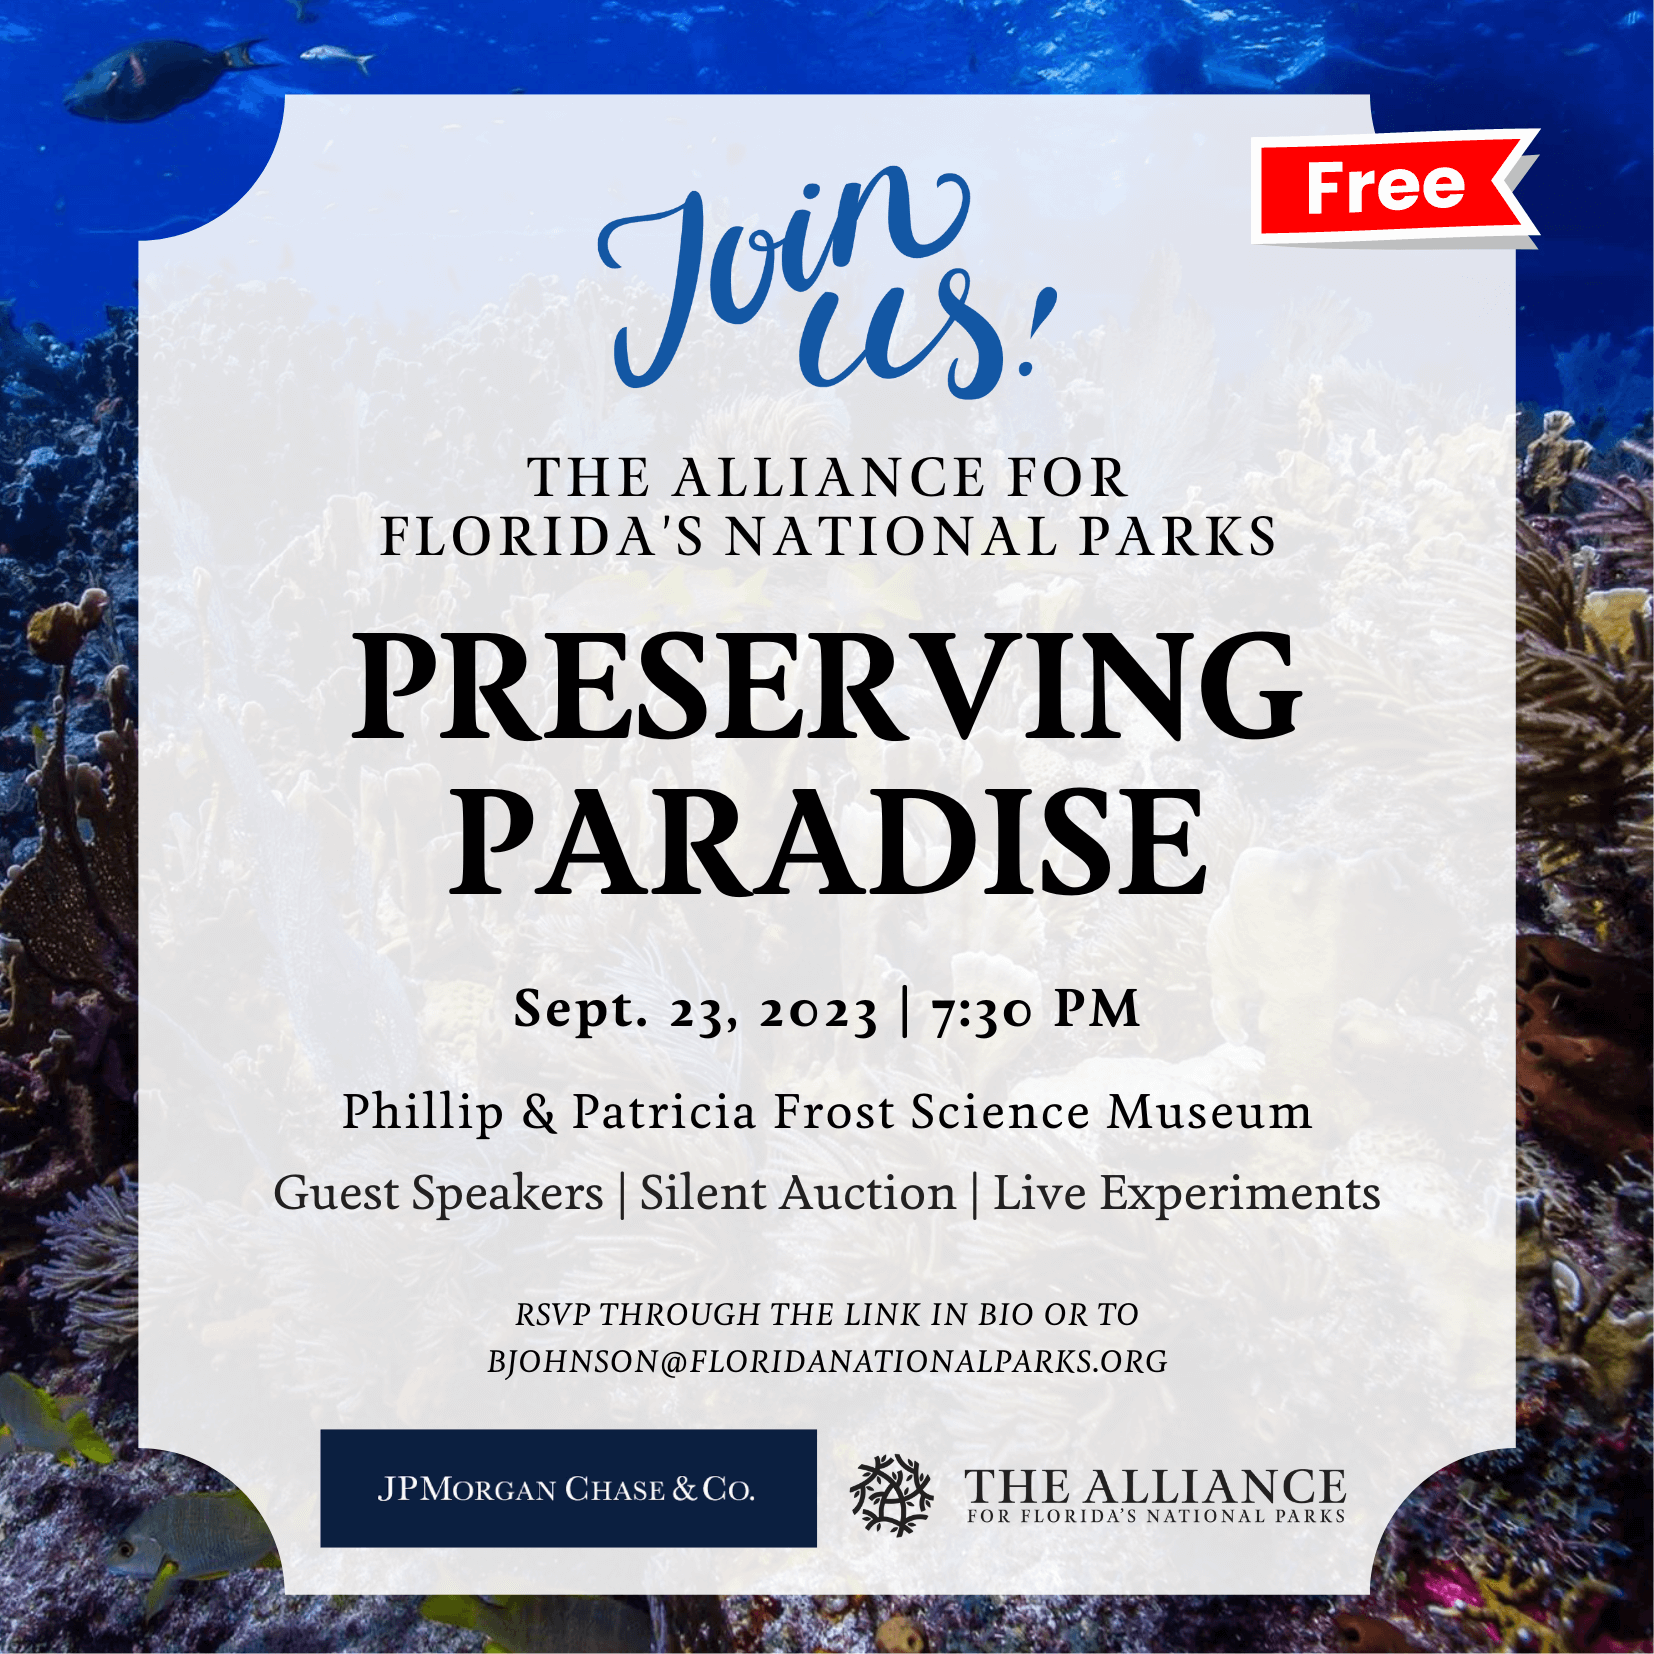 Preserving Paradise flyer with time at 7:30